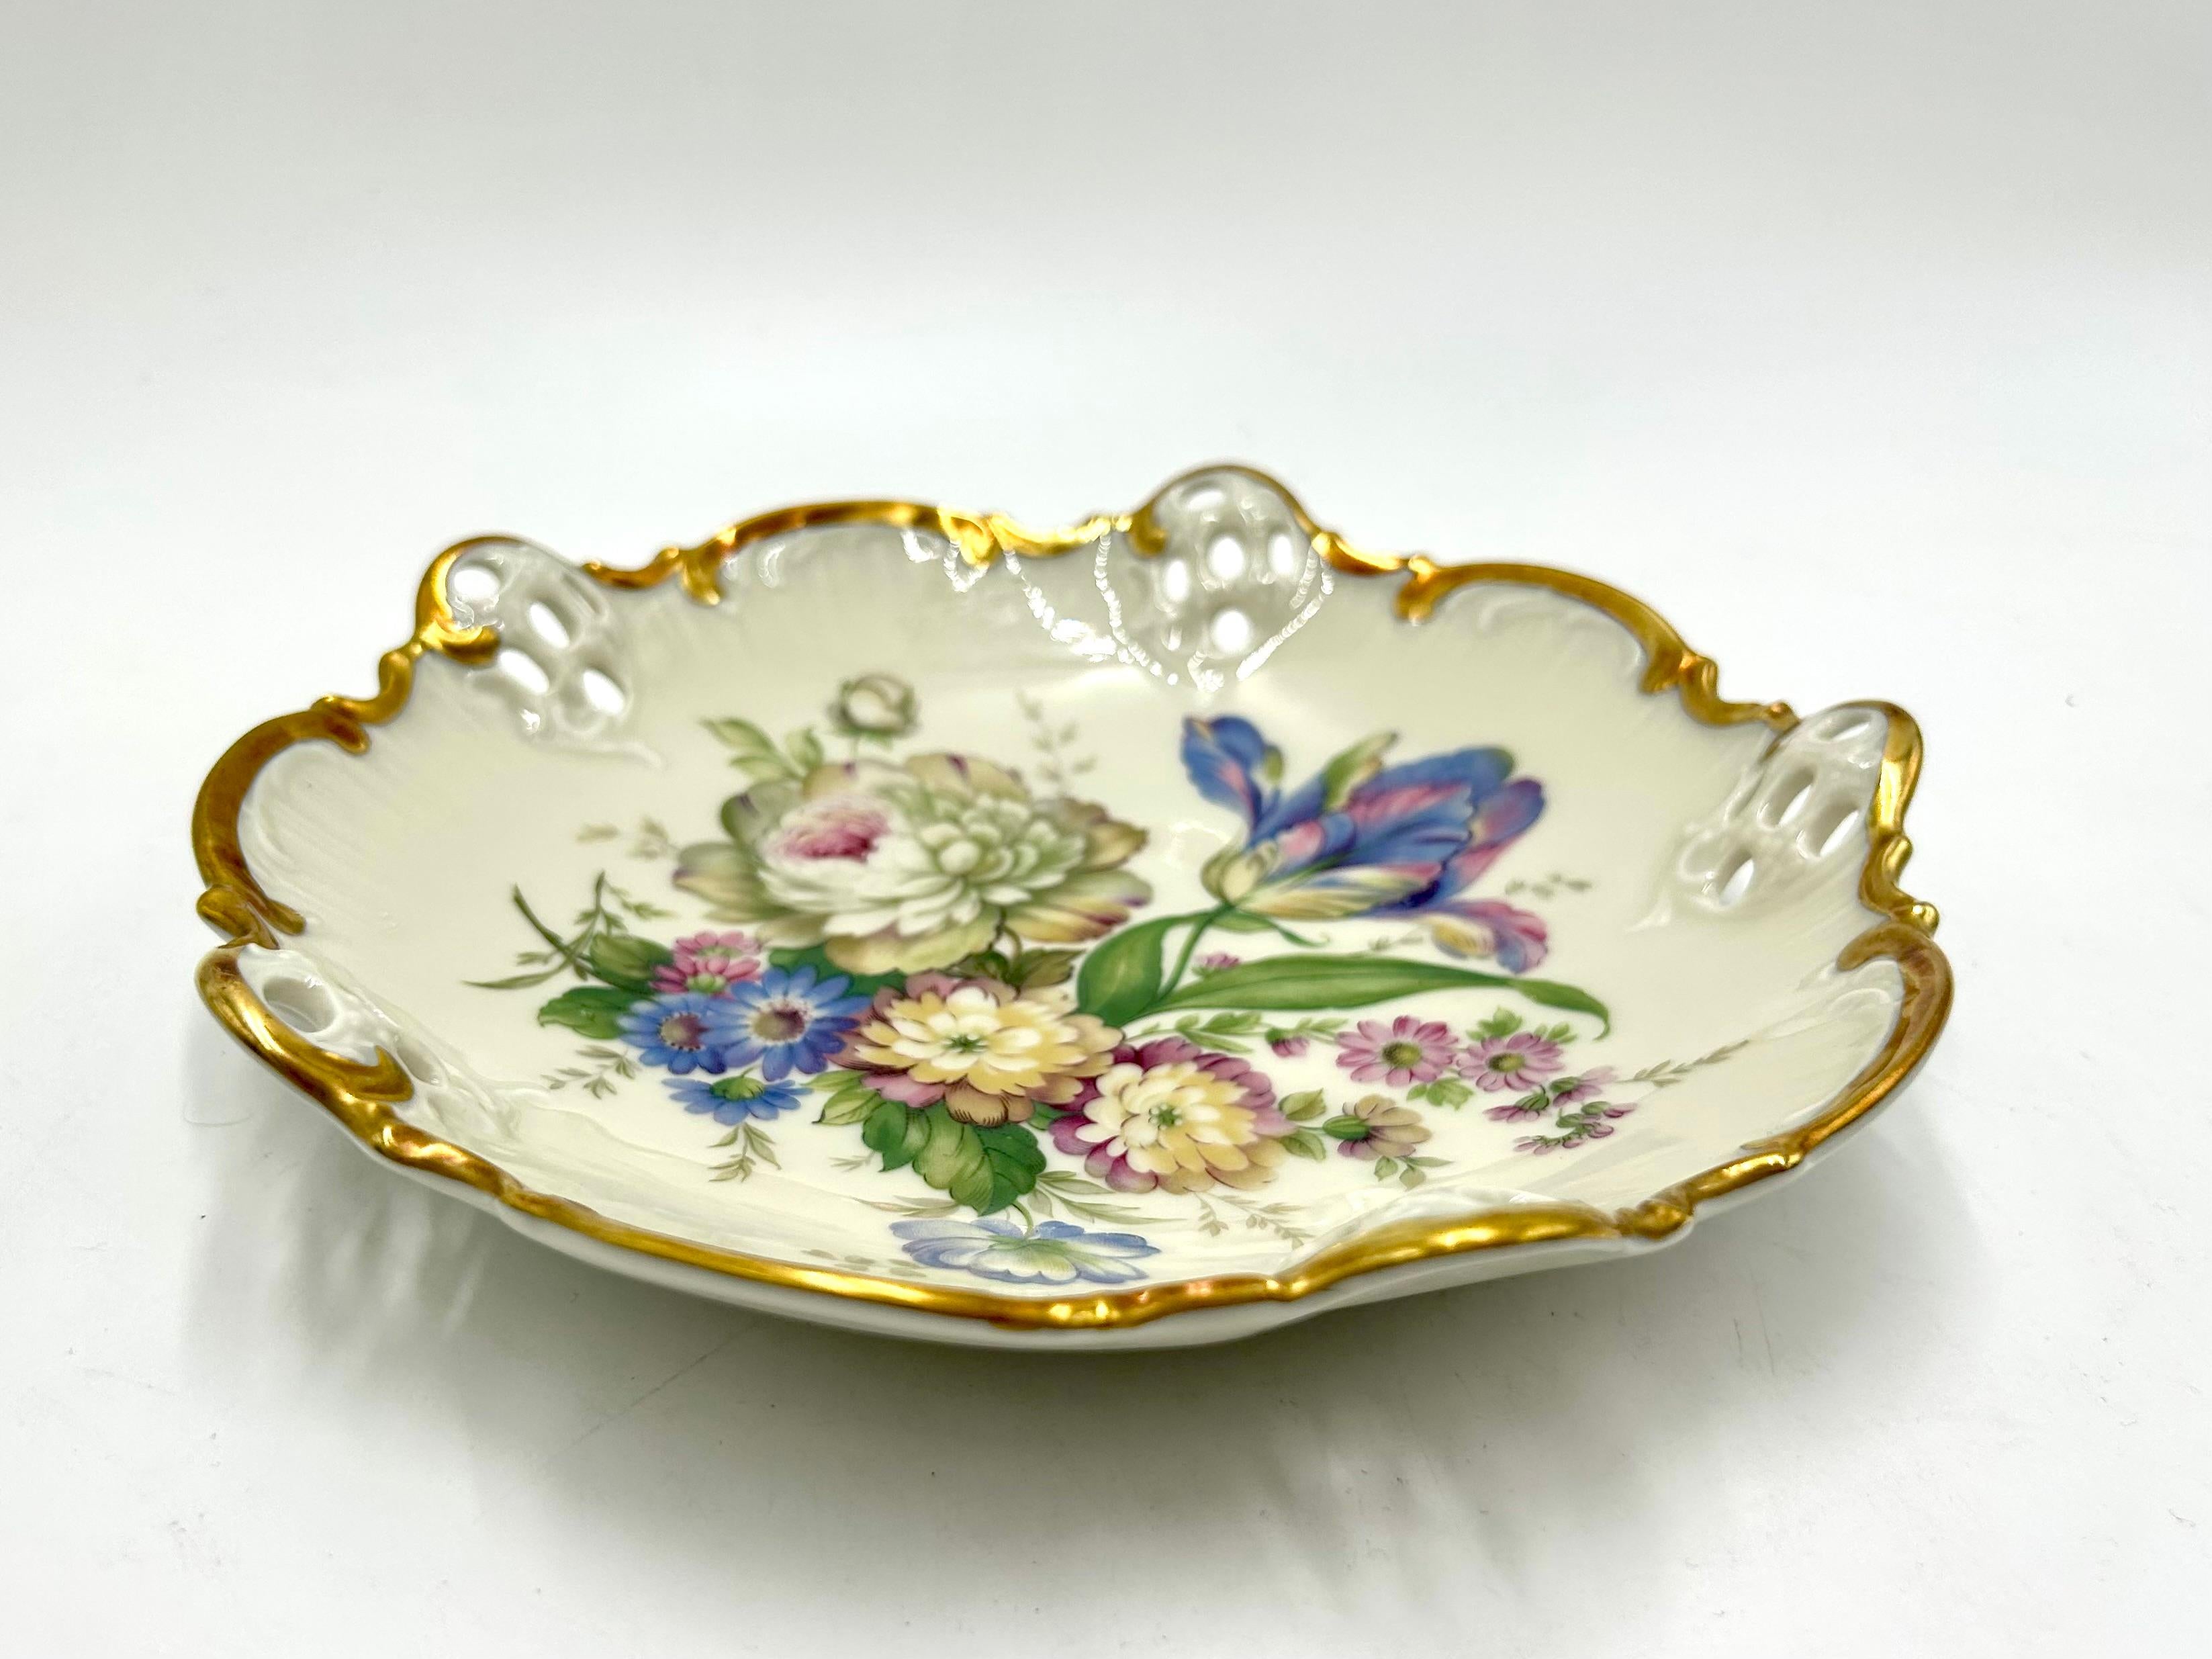 A plate with openwork sides from the Moliere series by the renowned German Rosenthal porcelain factory.

Ecru porcelain decorated with gilding on the edges and a floral bouquet motif.

Signed with the mark of the manufacturer from the years